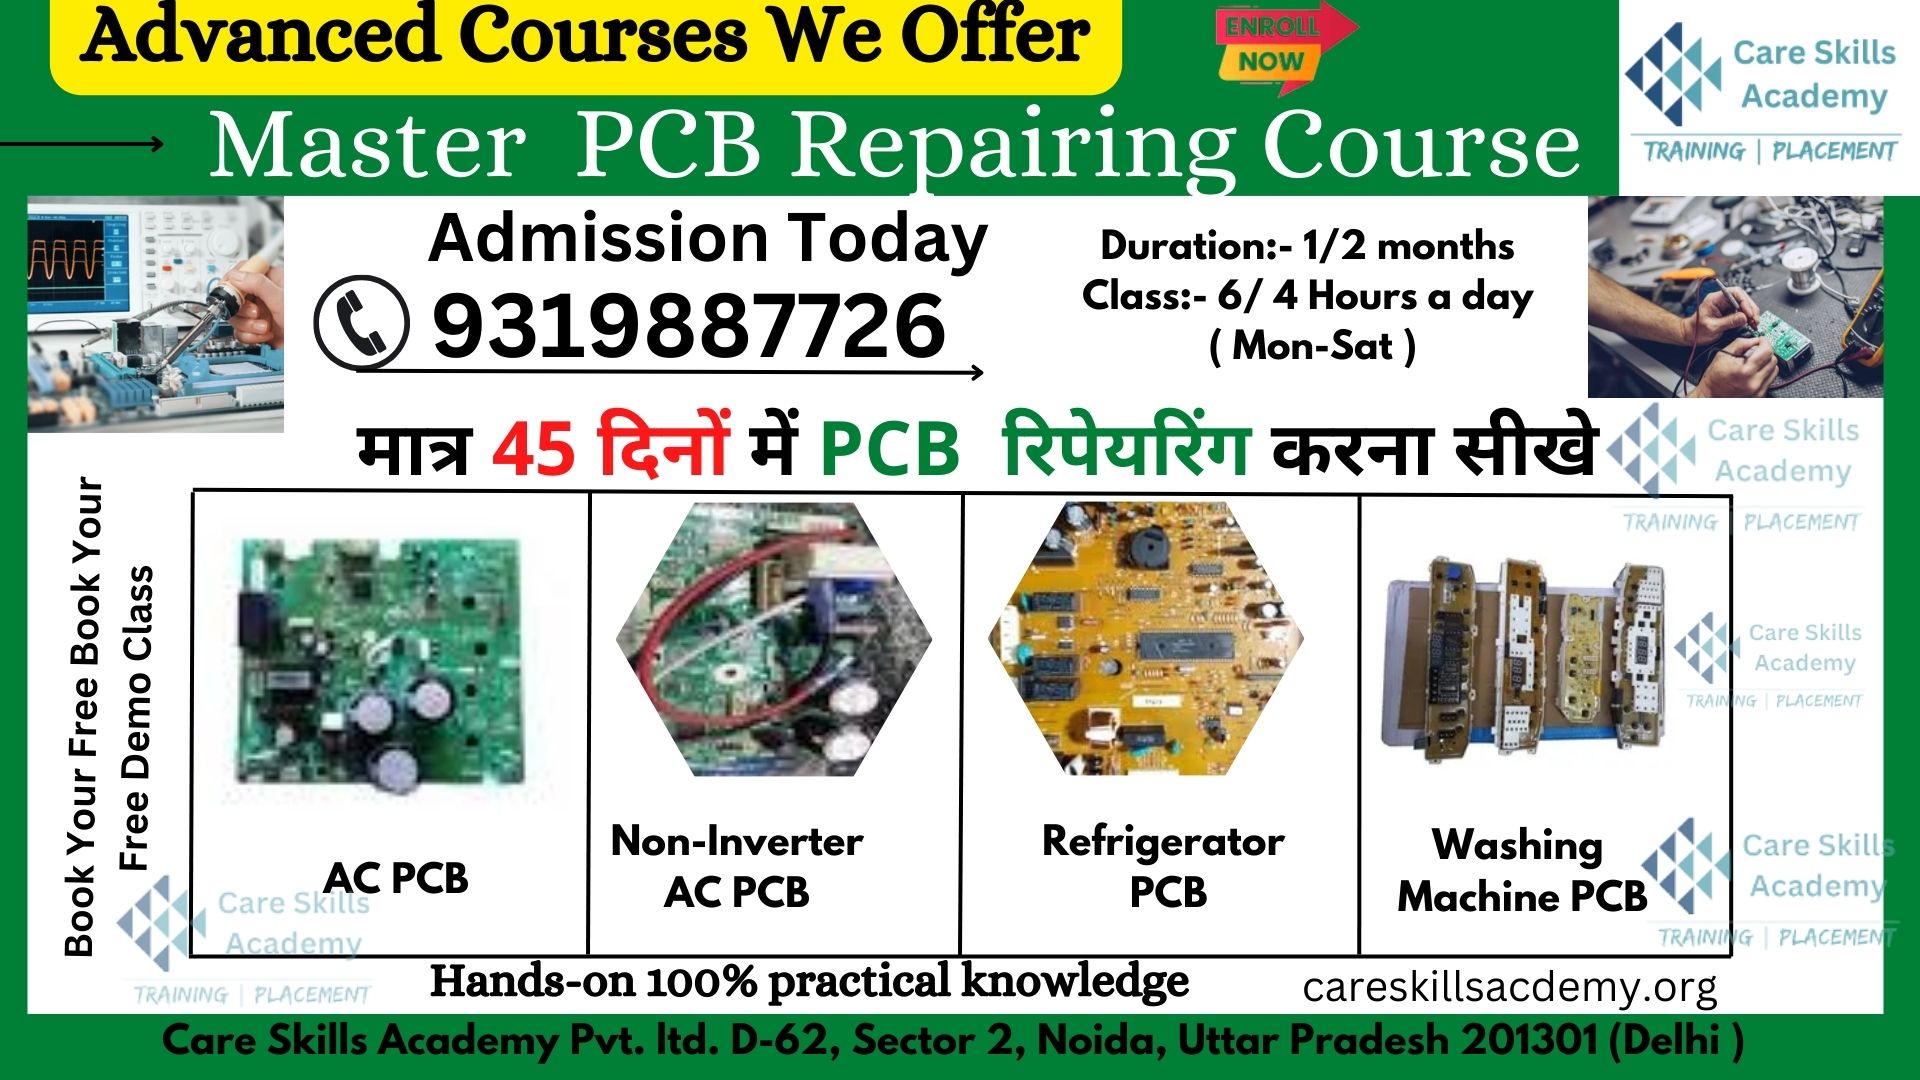 Inverter AC PCB Repairing Course at Care Skills Academy in Noida and Delhi!